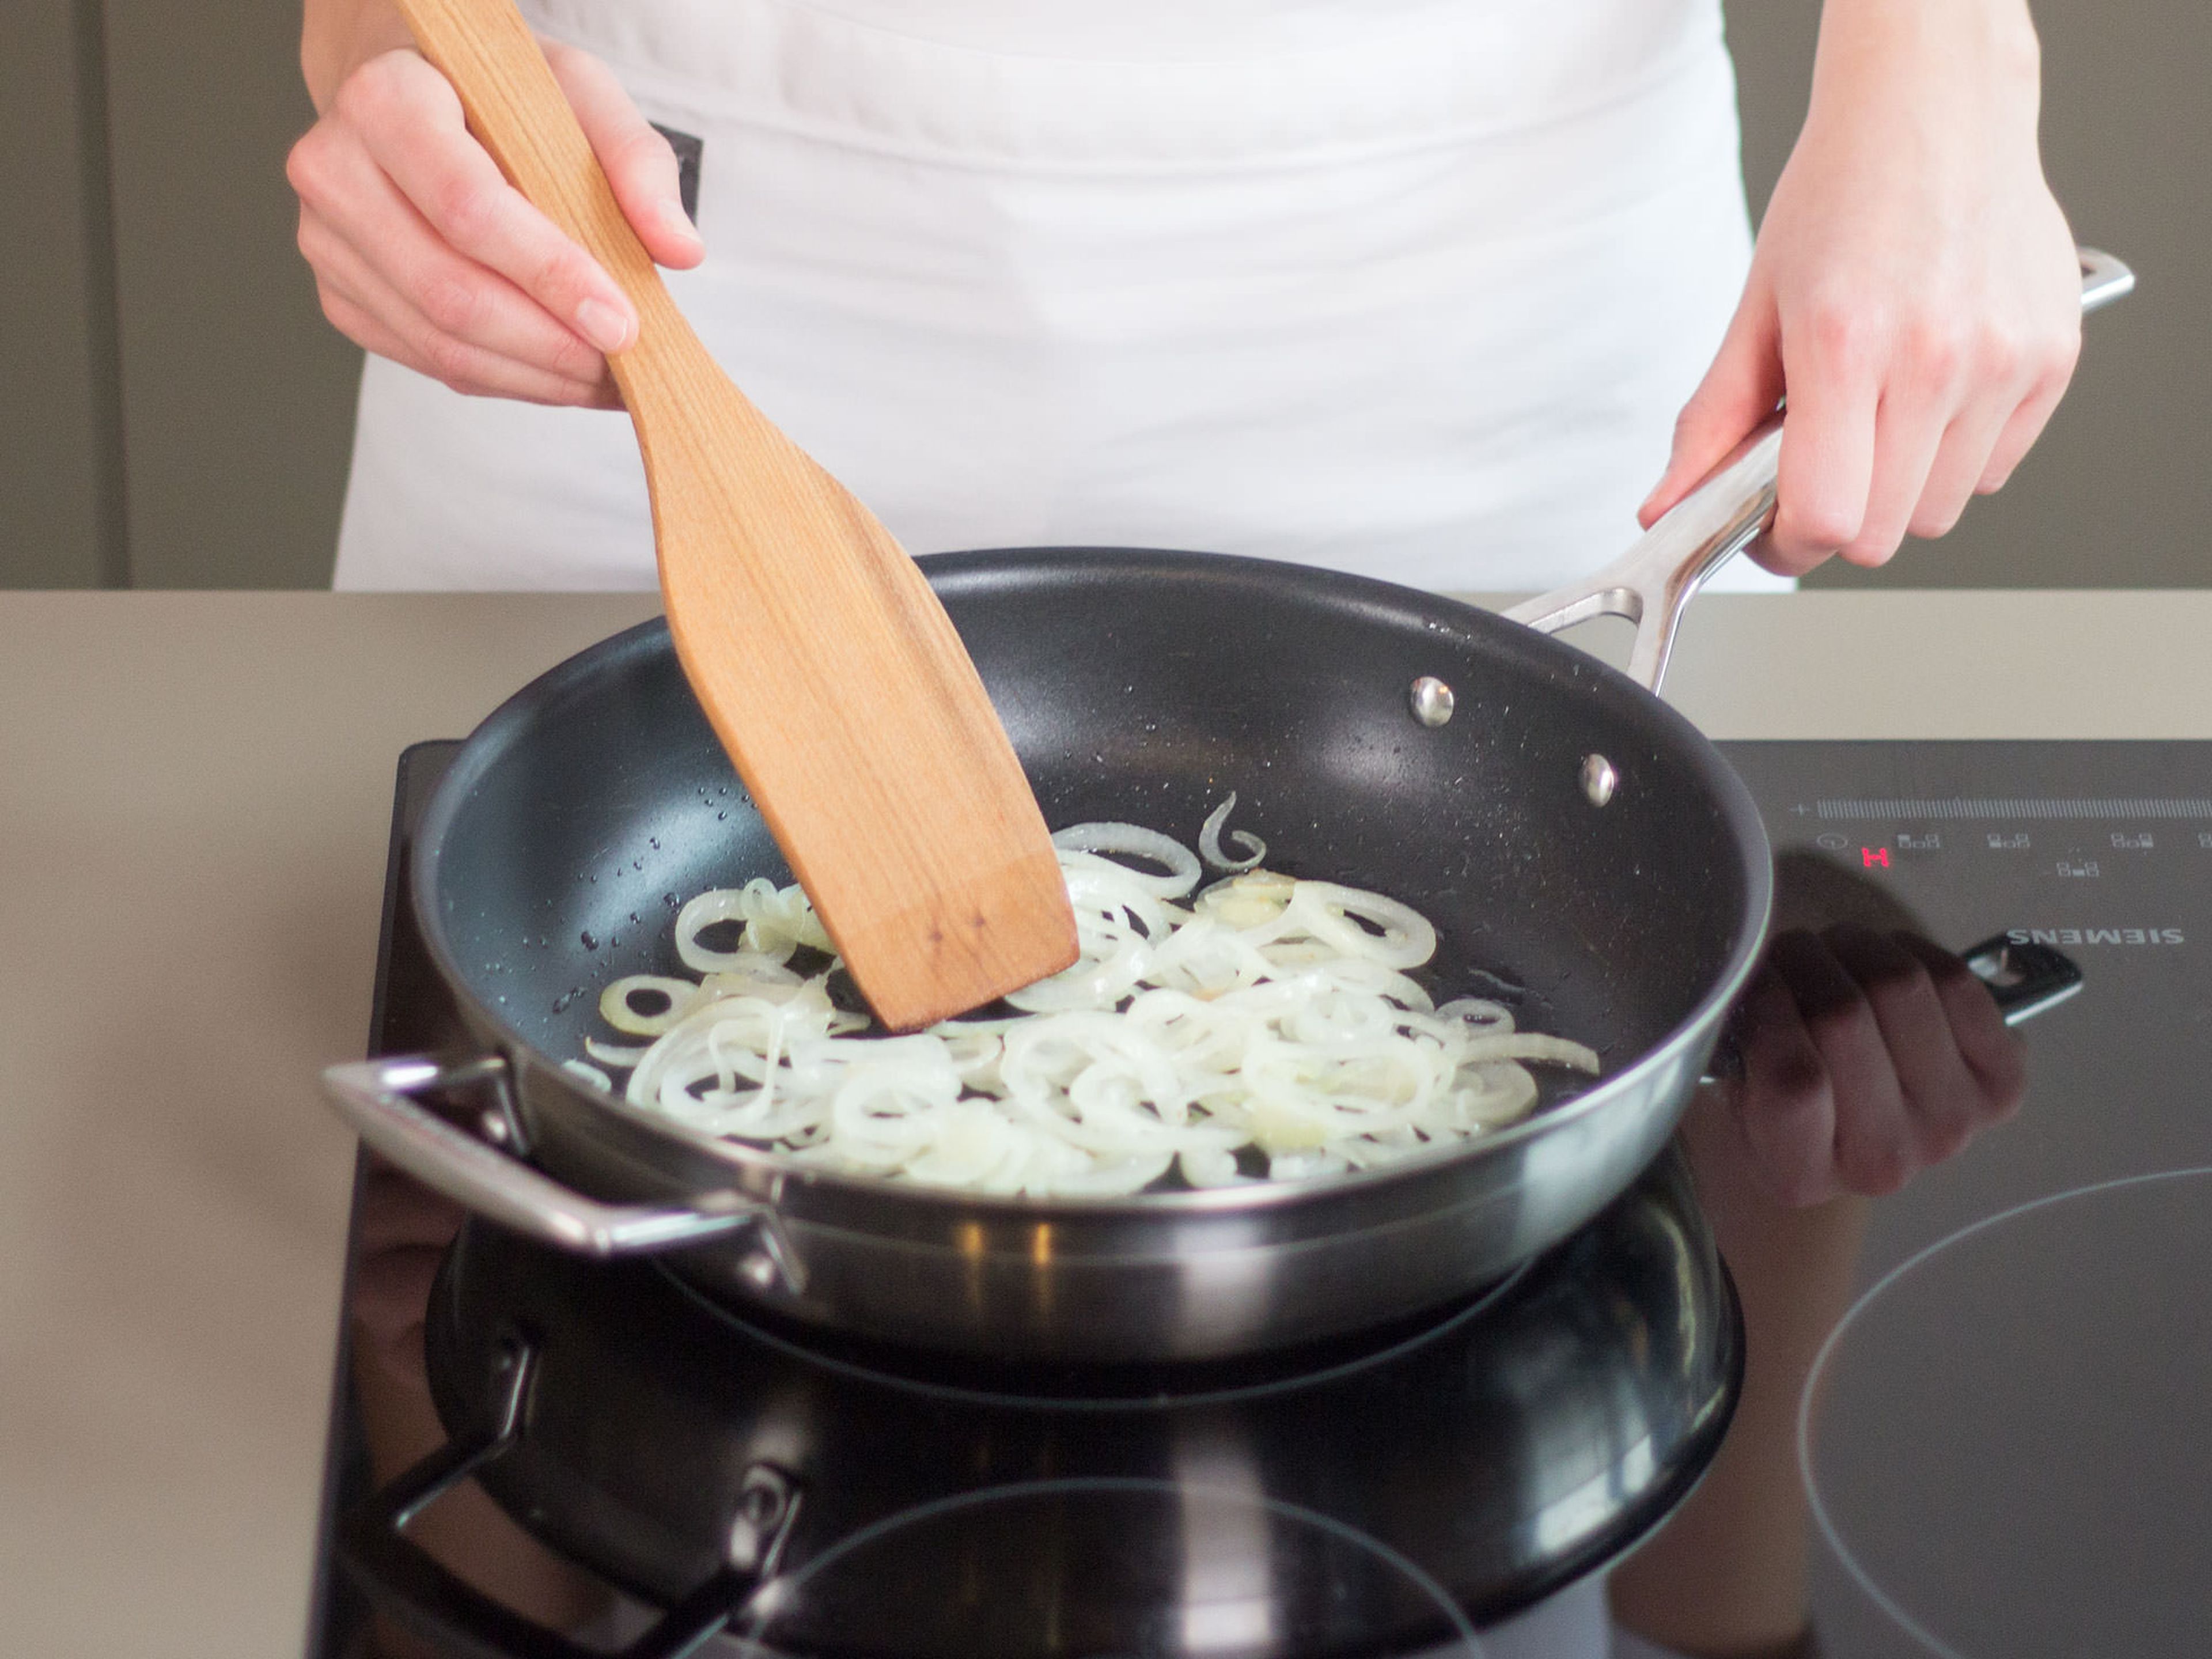 In a large frying pan, sauté onions over medium-high heat in some vegetable oil for approx. 3 – 5 min. Add spätzle and continue to cook for approx. 5 – 10 min. until crispy and golden brown.